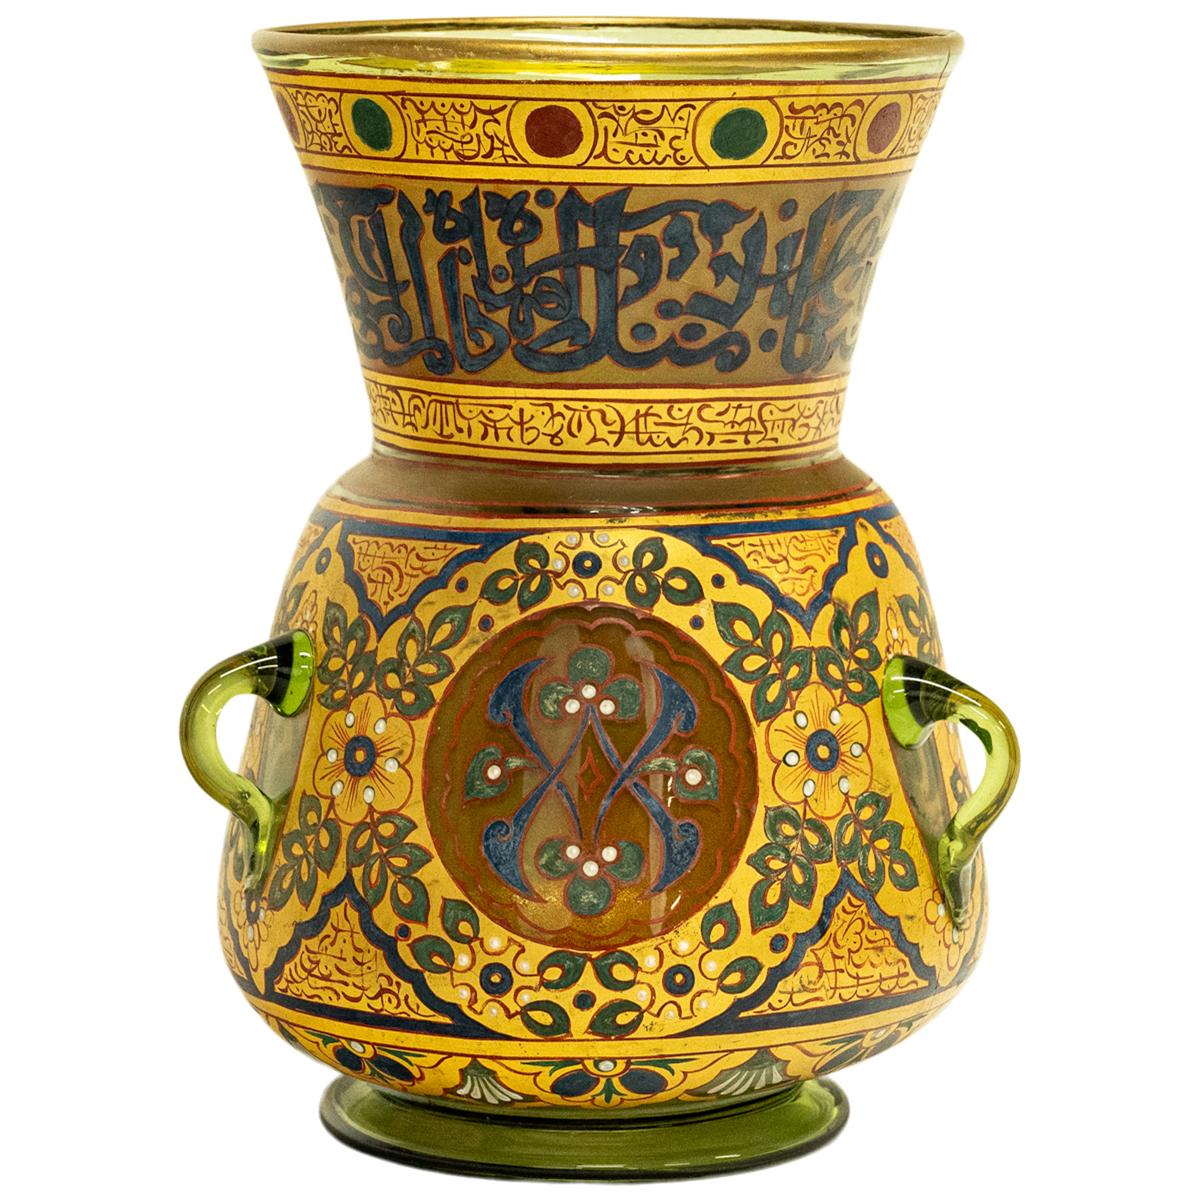 This very fine antique Mamluk style mosque lamp, most likely by Phillippe-Joseph Brocard (1831-1896), made in Paris circa 1880. 
The hand-blown glass lamp having a bulbous body with a tapered neck & flaring mouth, standing on a compressed foot. The